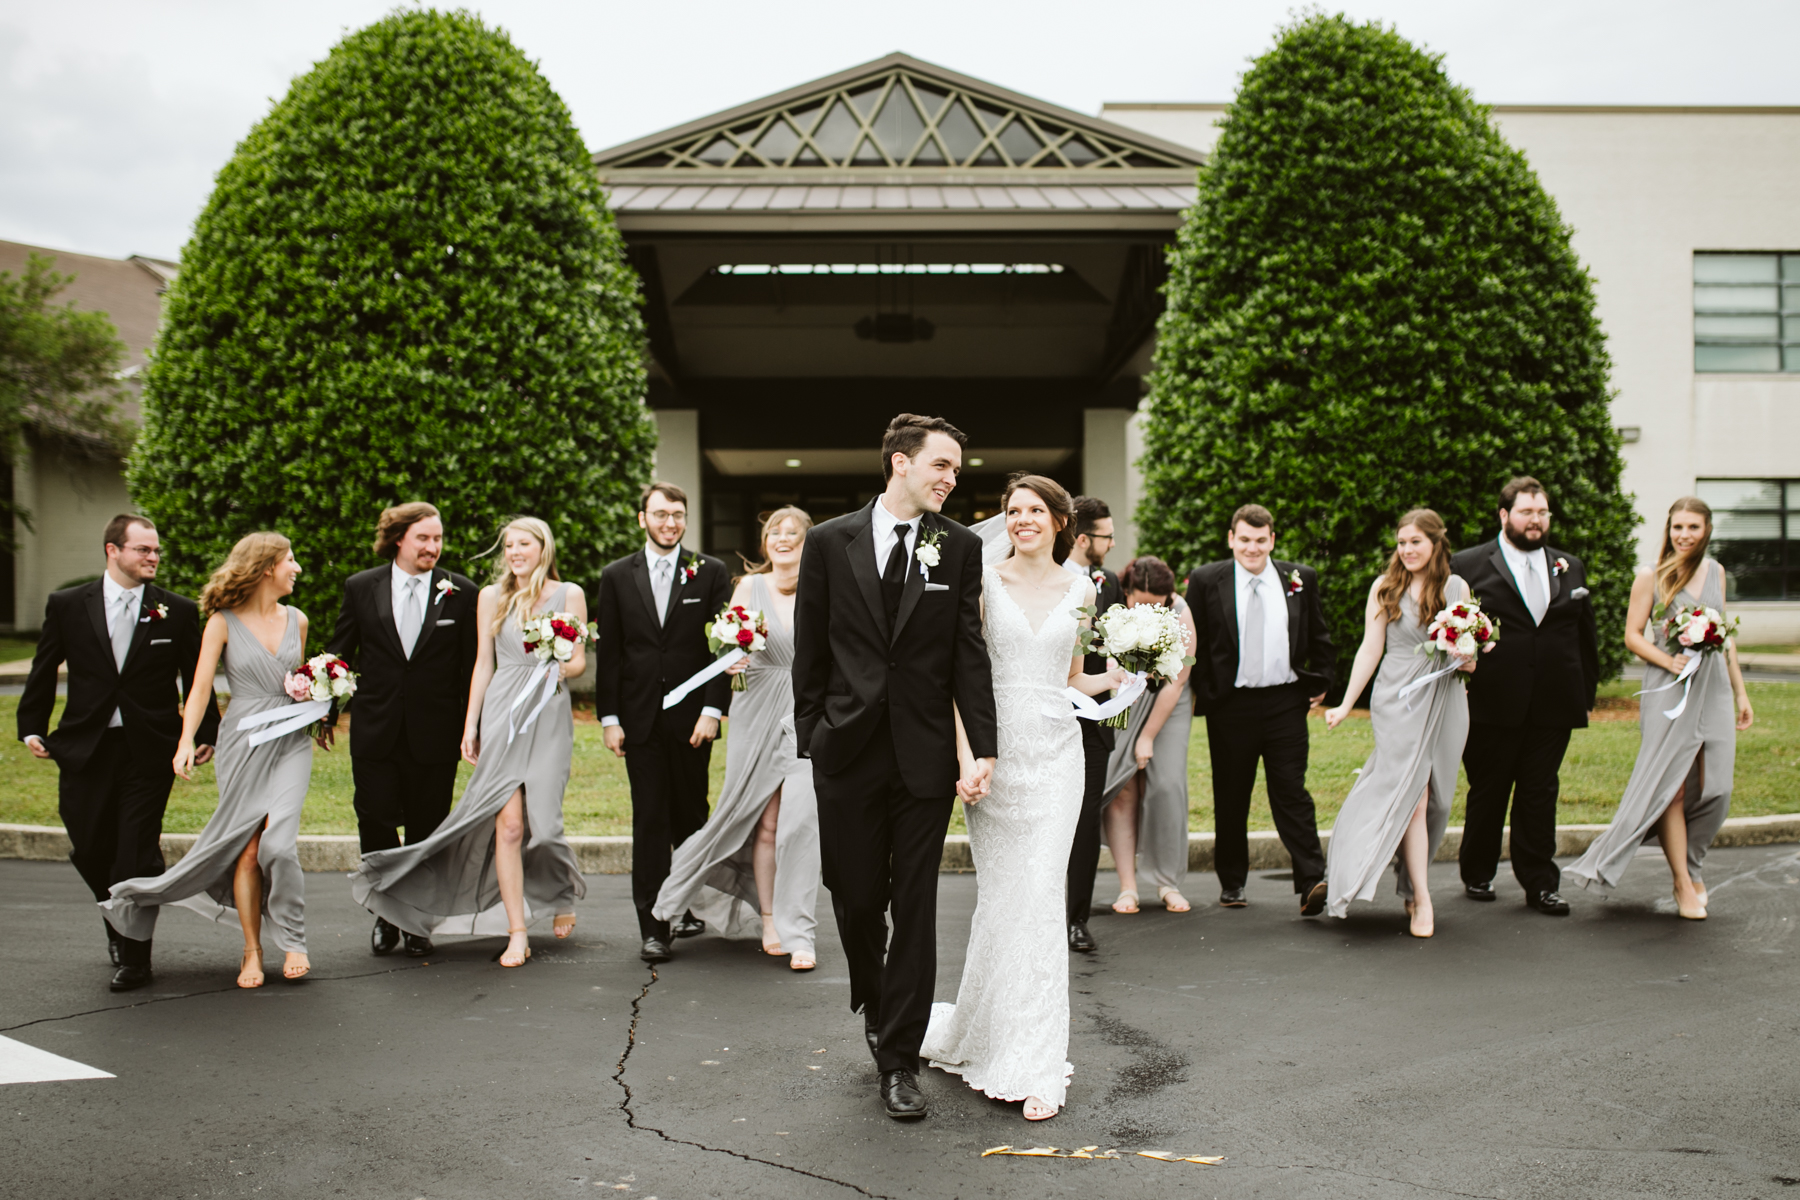 bridal party portraits after a rainy summer wedding at brentwood hills church in Nashville, tennessee